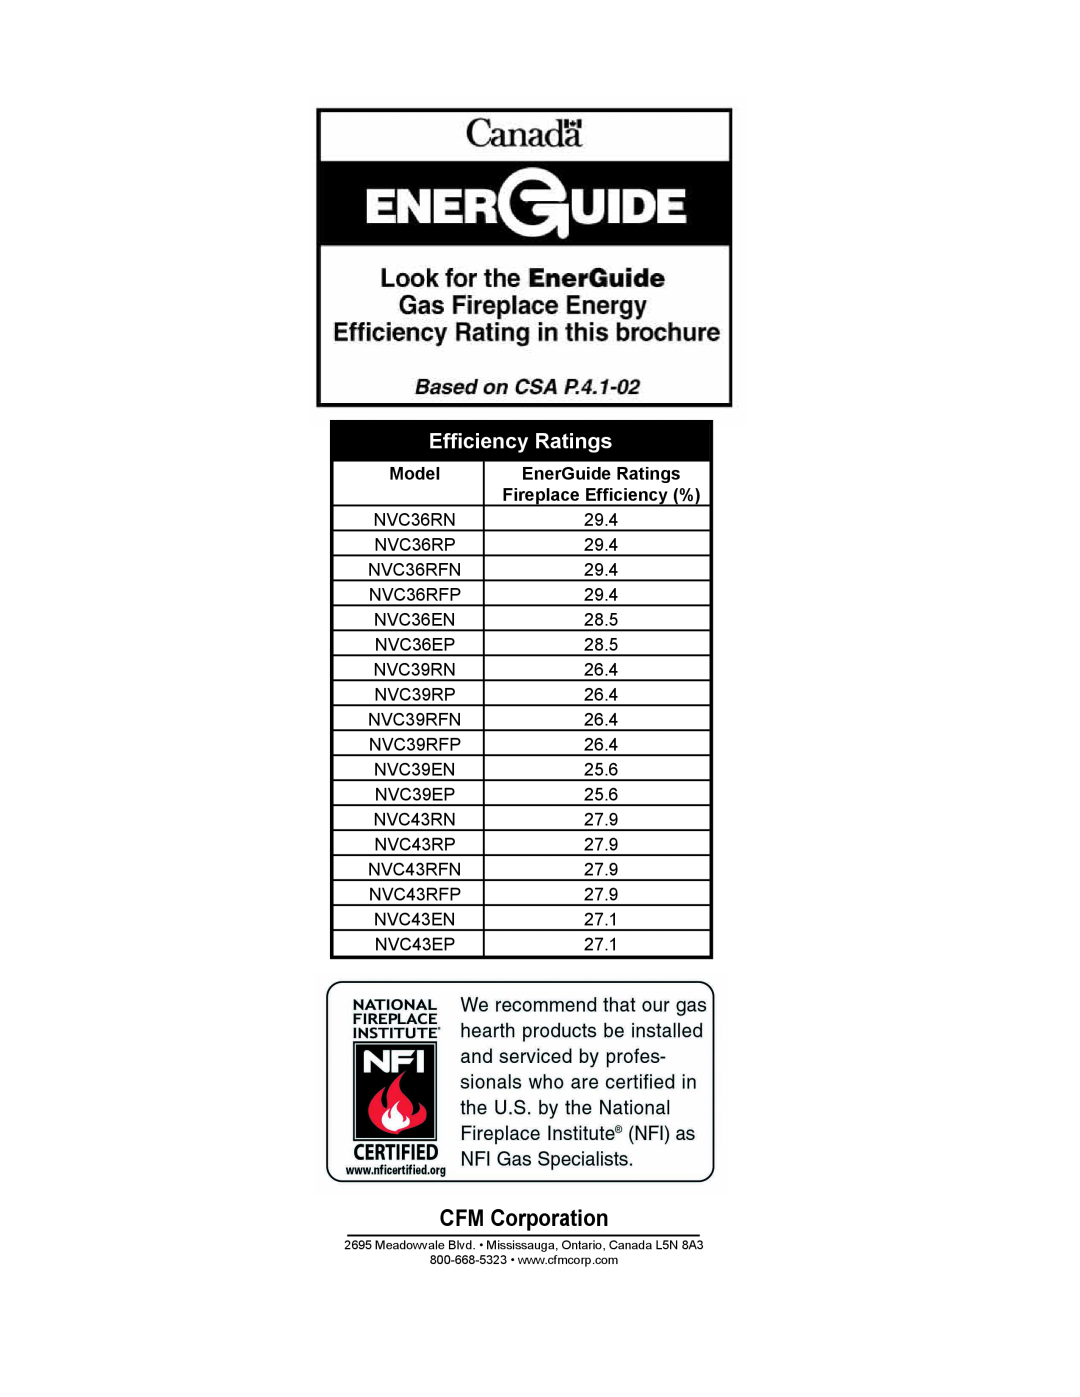 Vermont Casting NVC43, NVC36, NVC39 Efﬁciency Ratings, CFM Corporation, Model, EnerGuide Ratings, Fireplace Efﬁciency % 